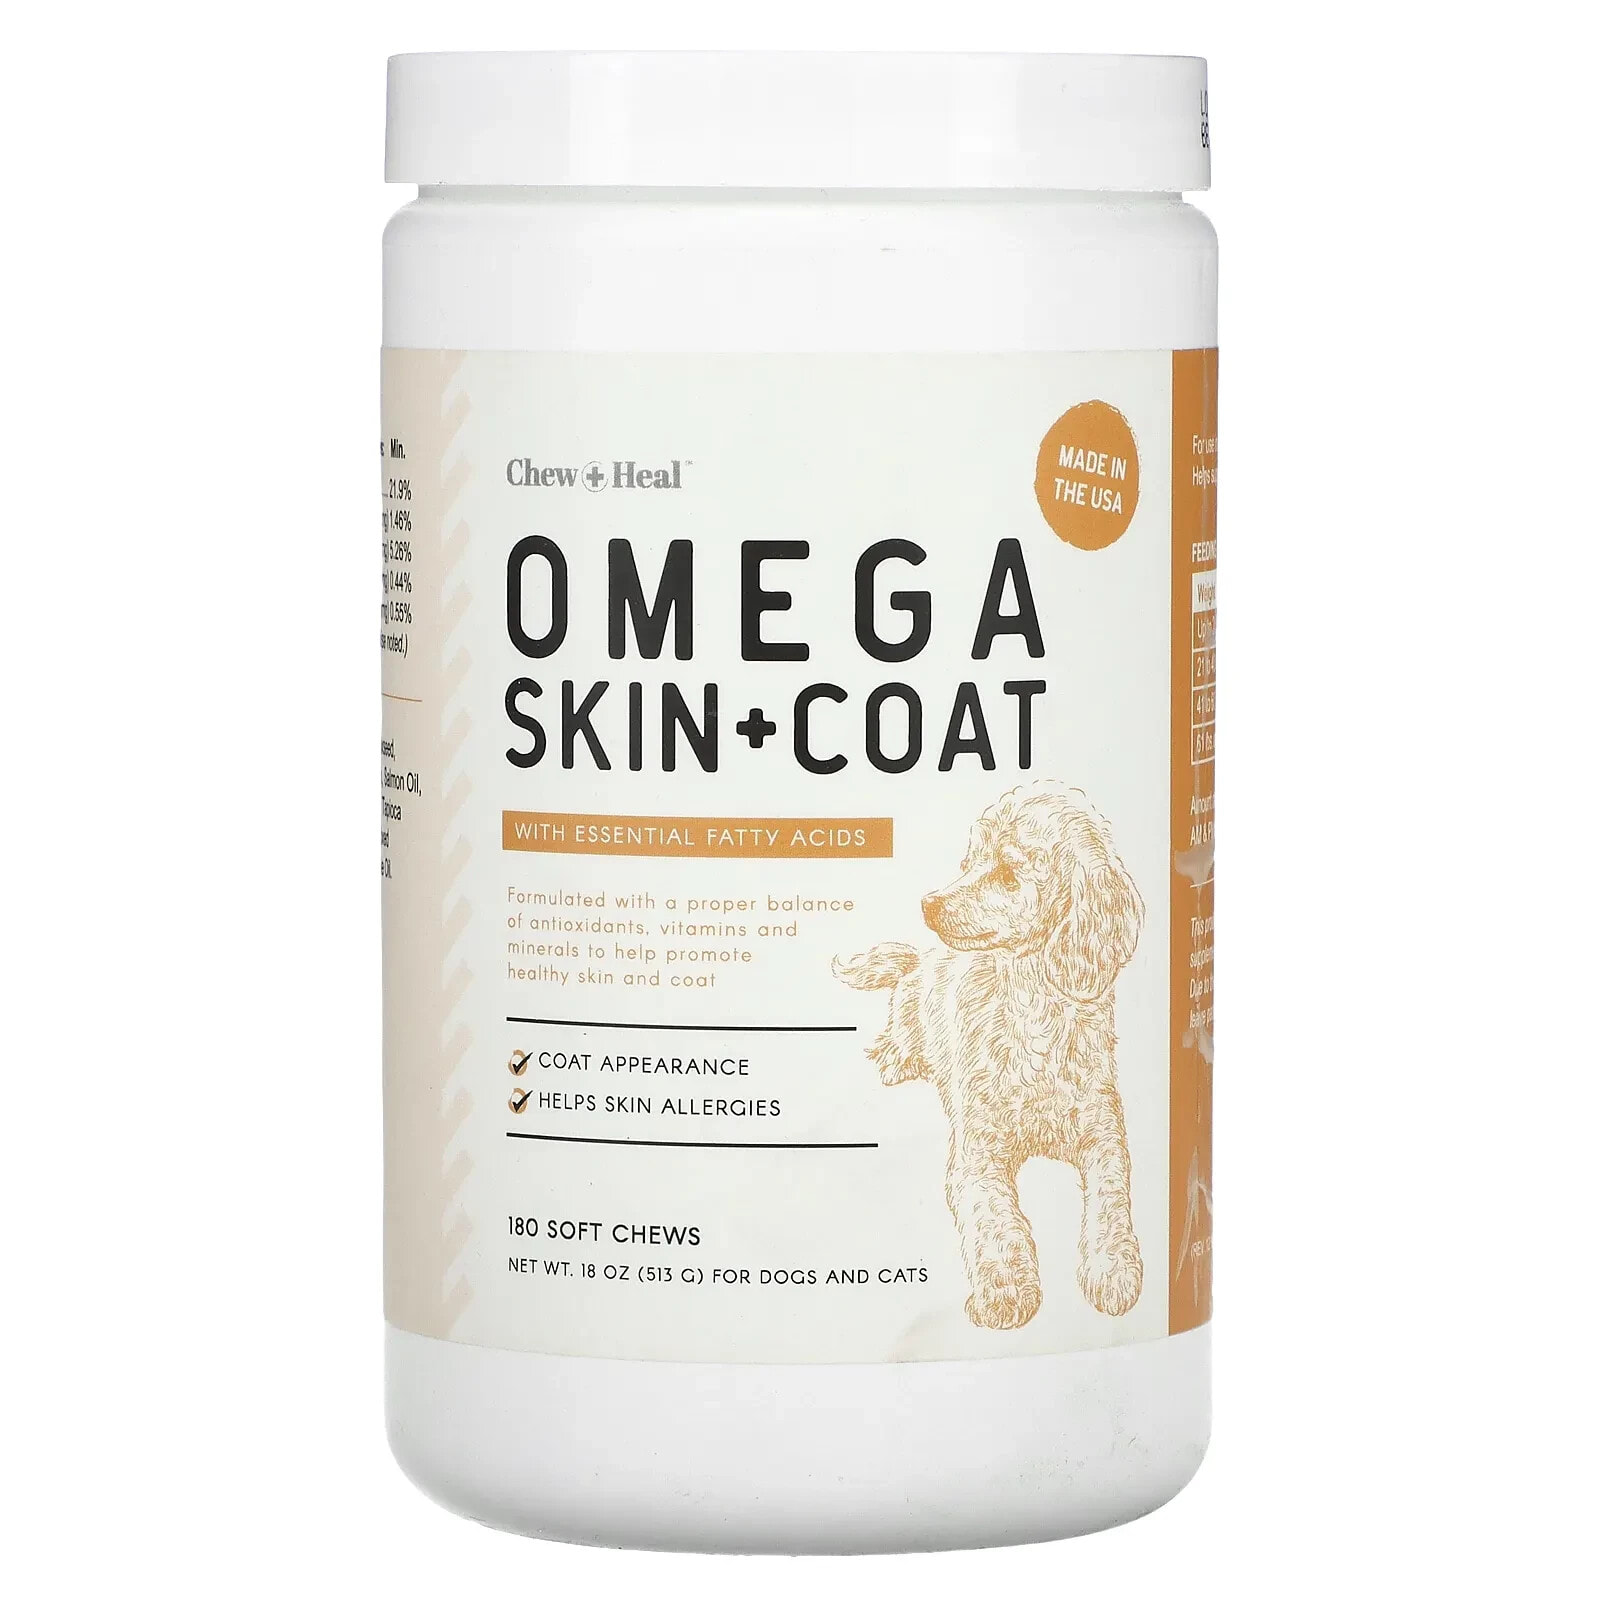 Omega Skin + Coat, with Essential Fatty Acids, For Dogs and Cats, 180 Soft Chew, 18 oz (513 g)